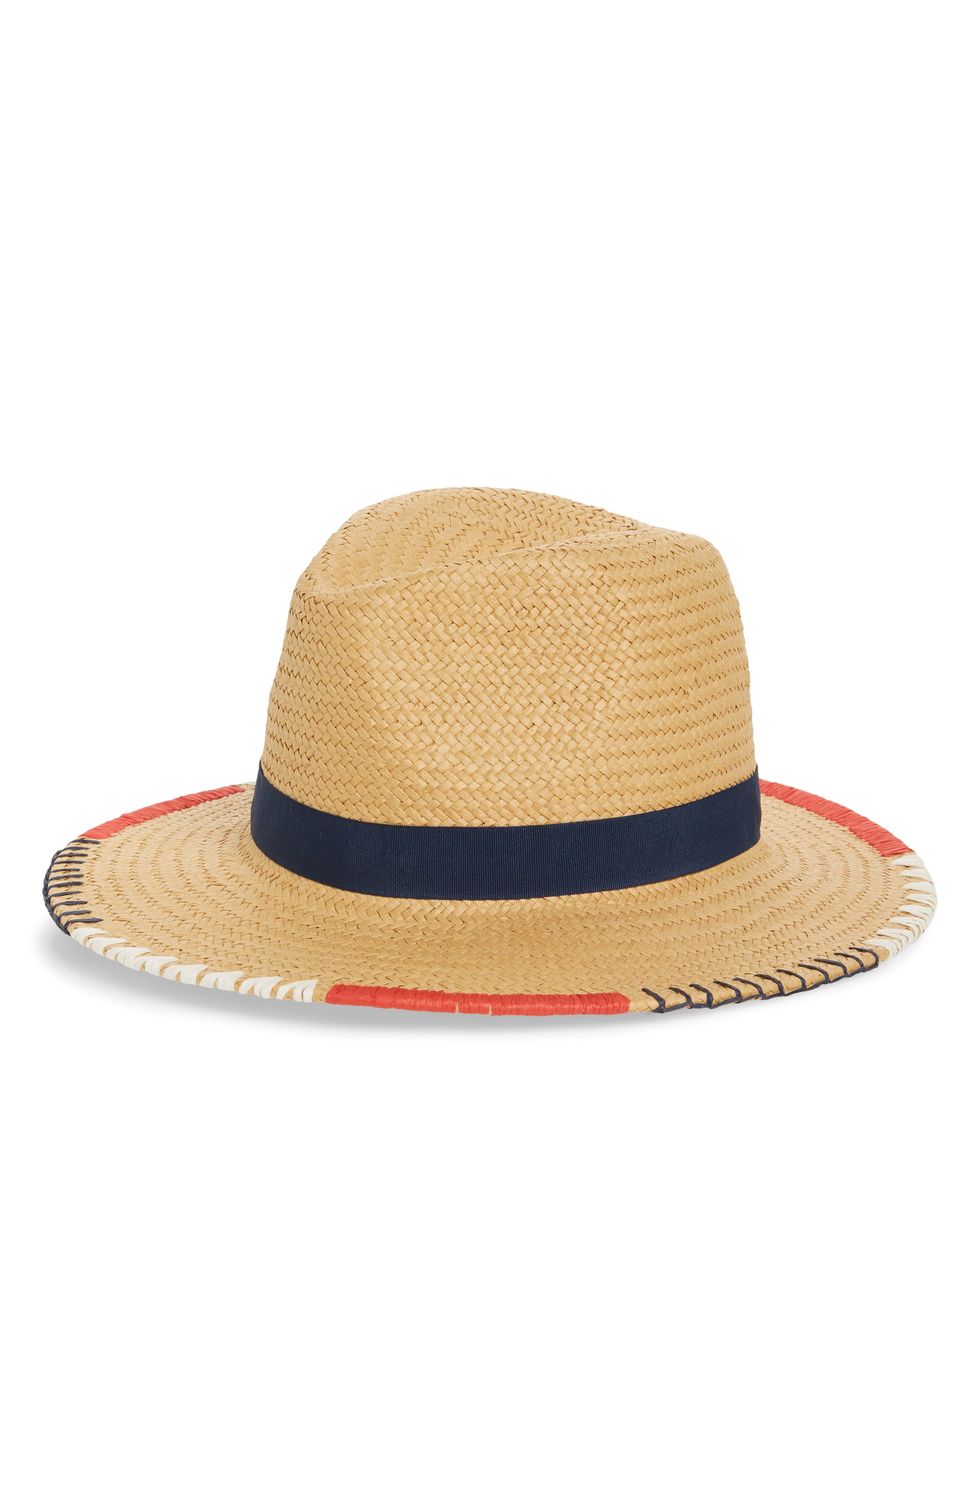 Embroidered Straw Panama Hat